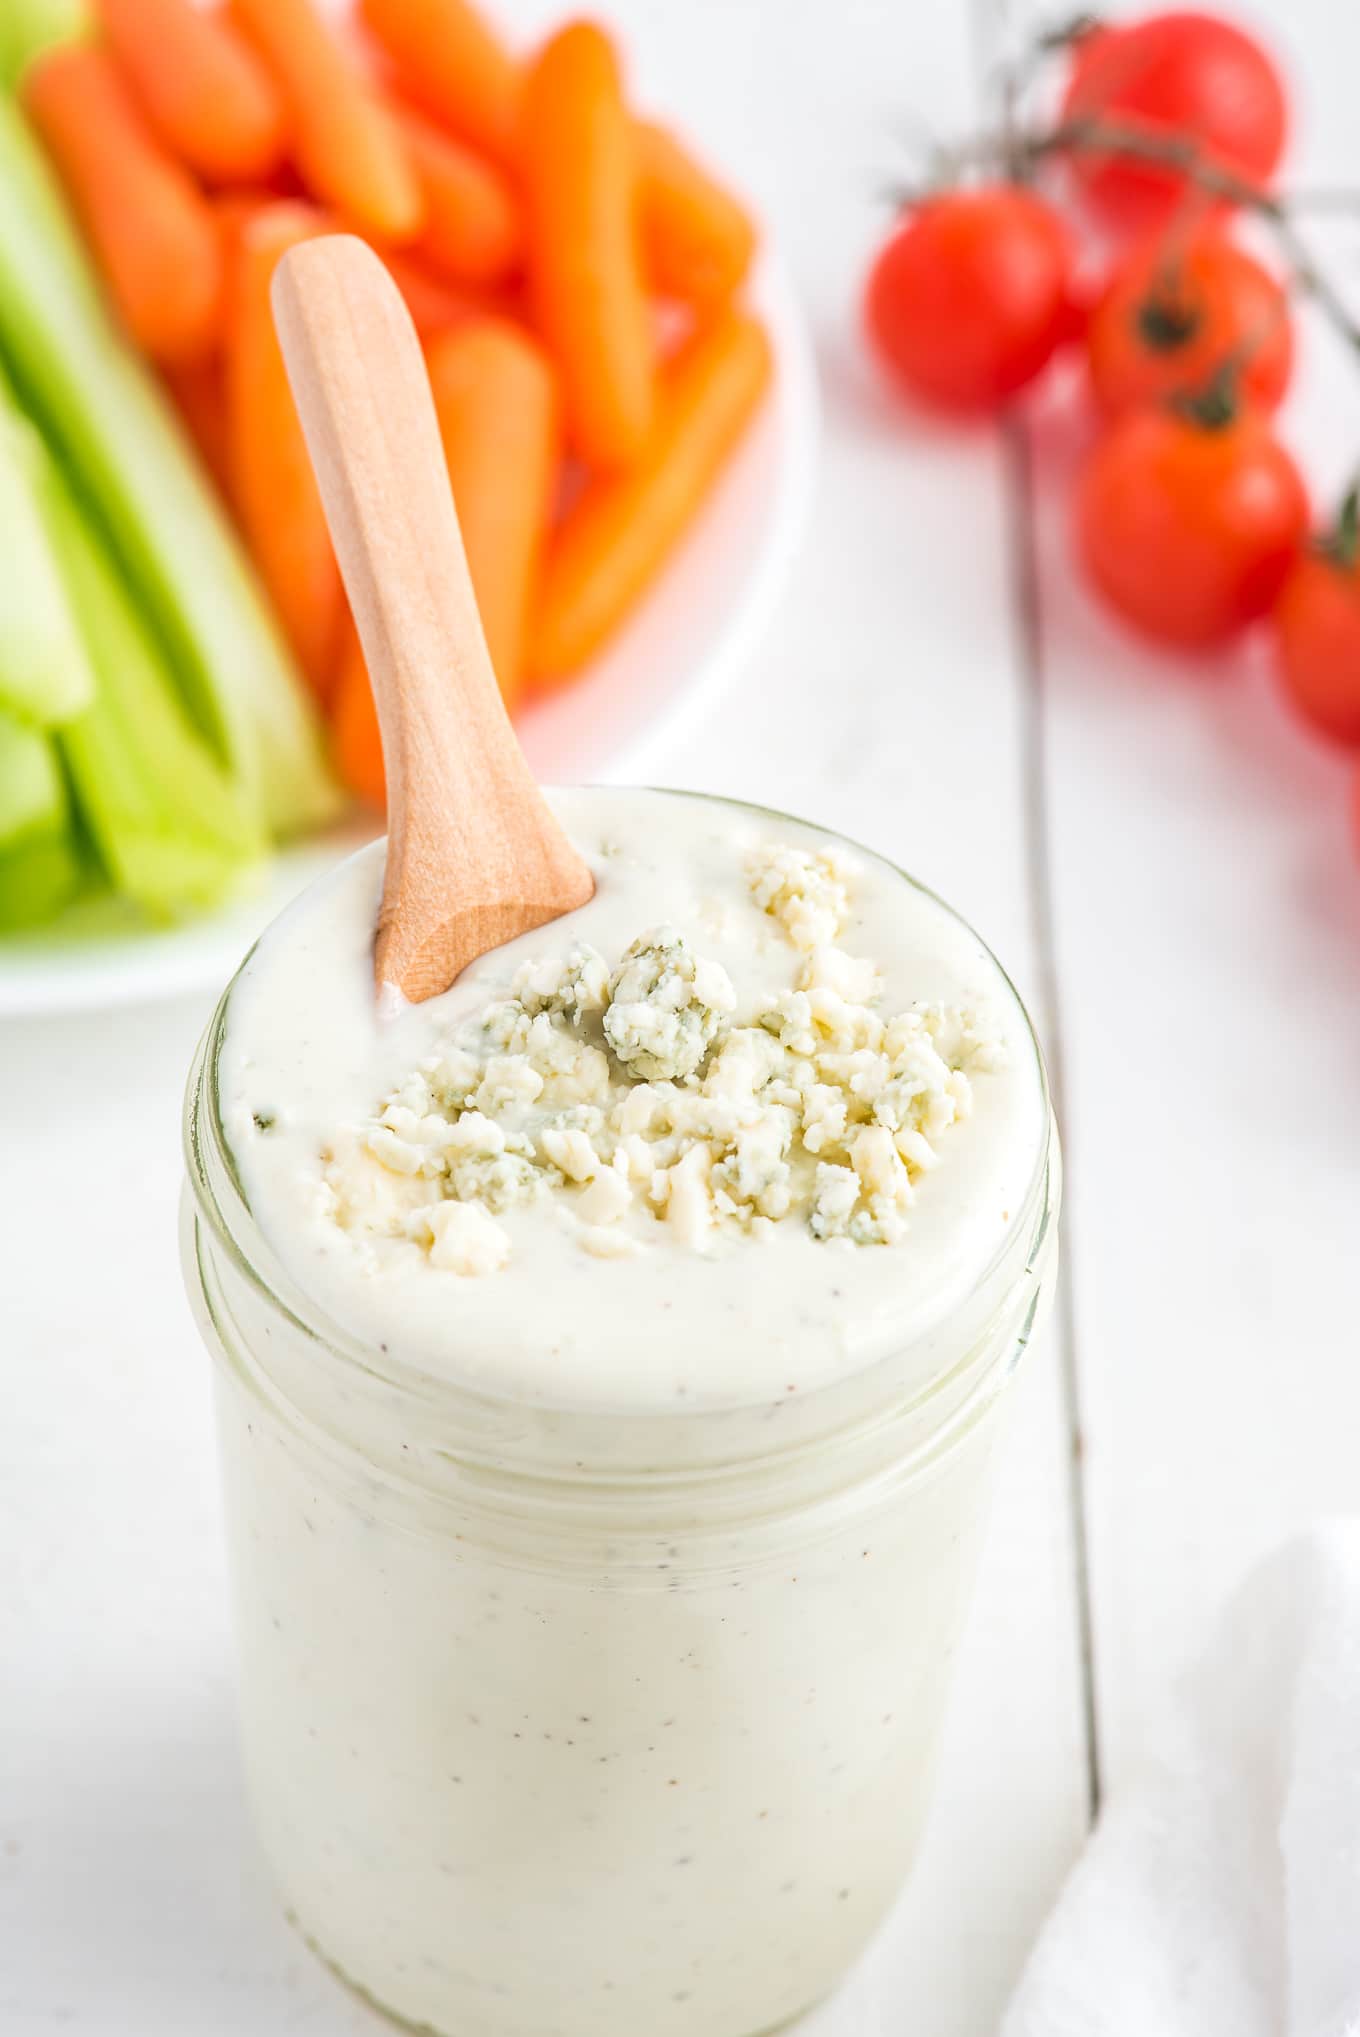 A jar of blue cheese crumbles dressing with a spoon in the jar in front of a platter of veggies.